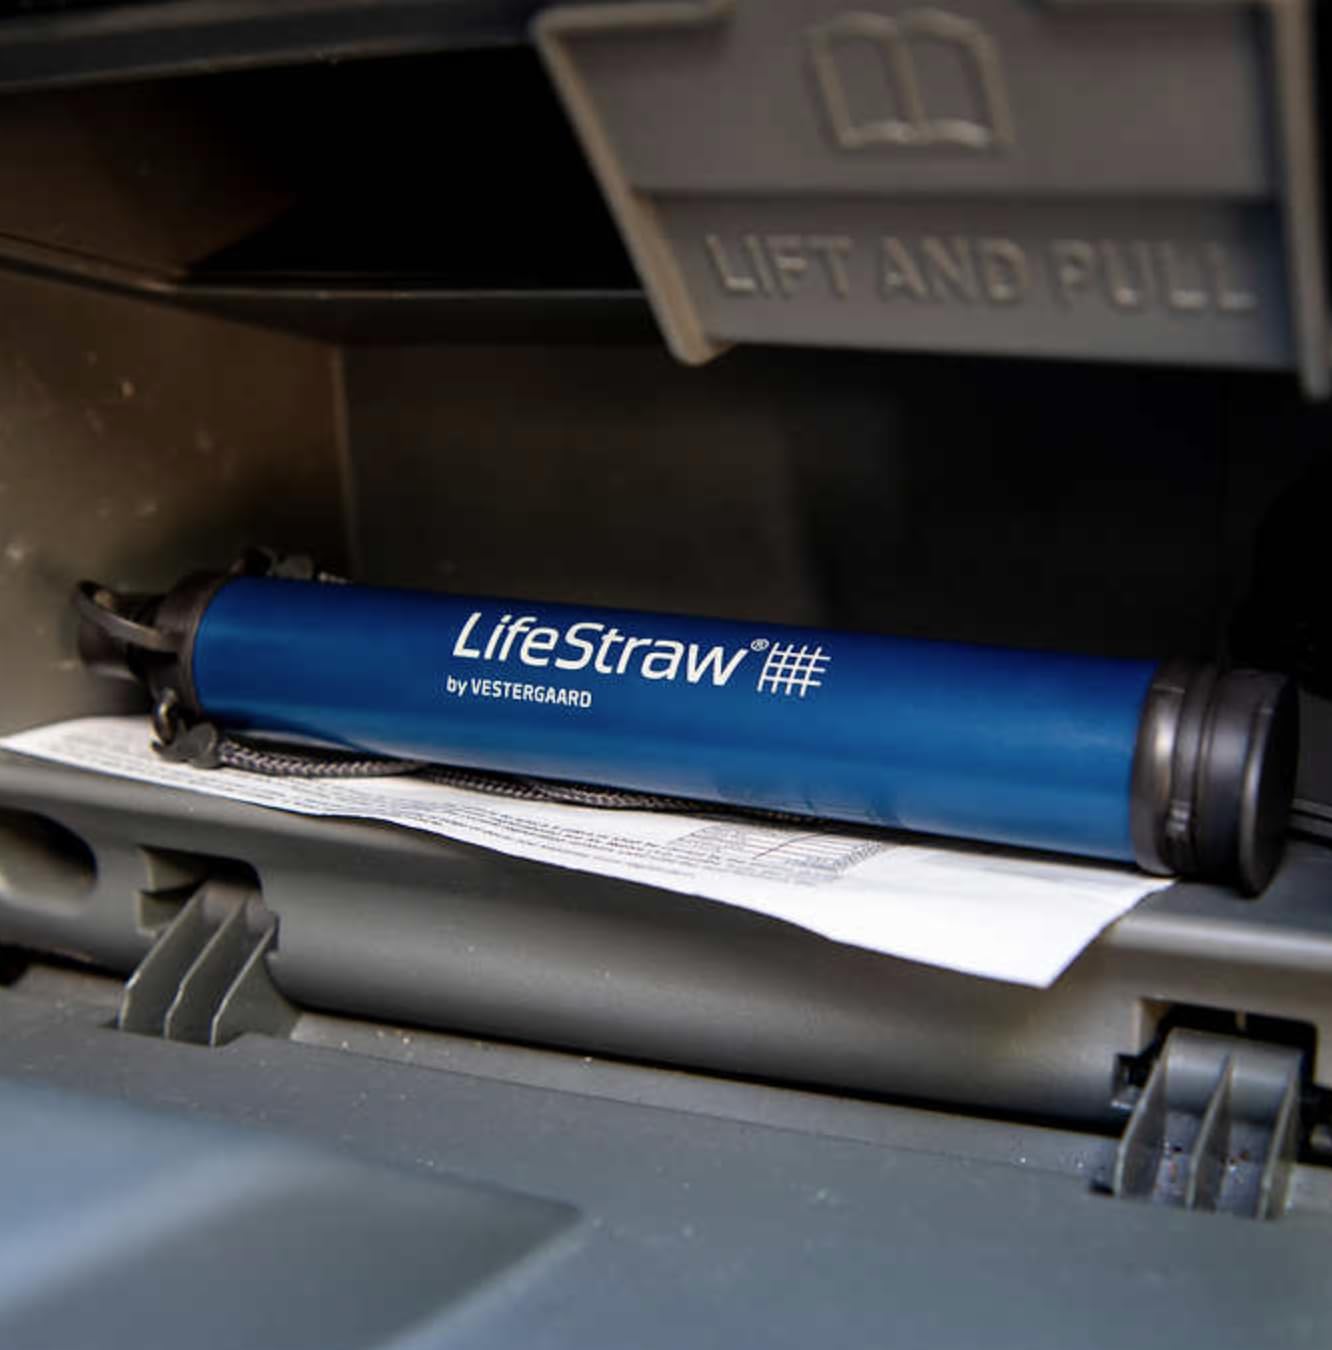 LifeStraw Personal Blue 4 Pack